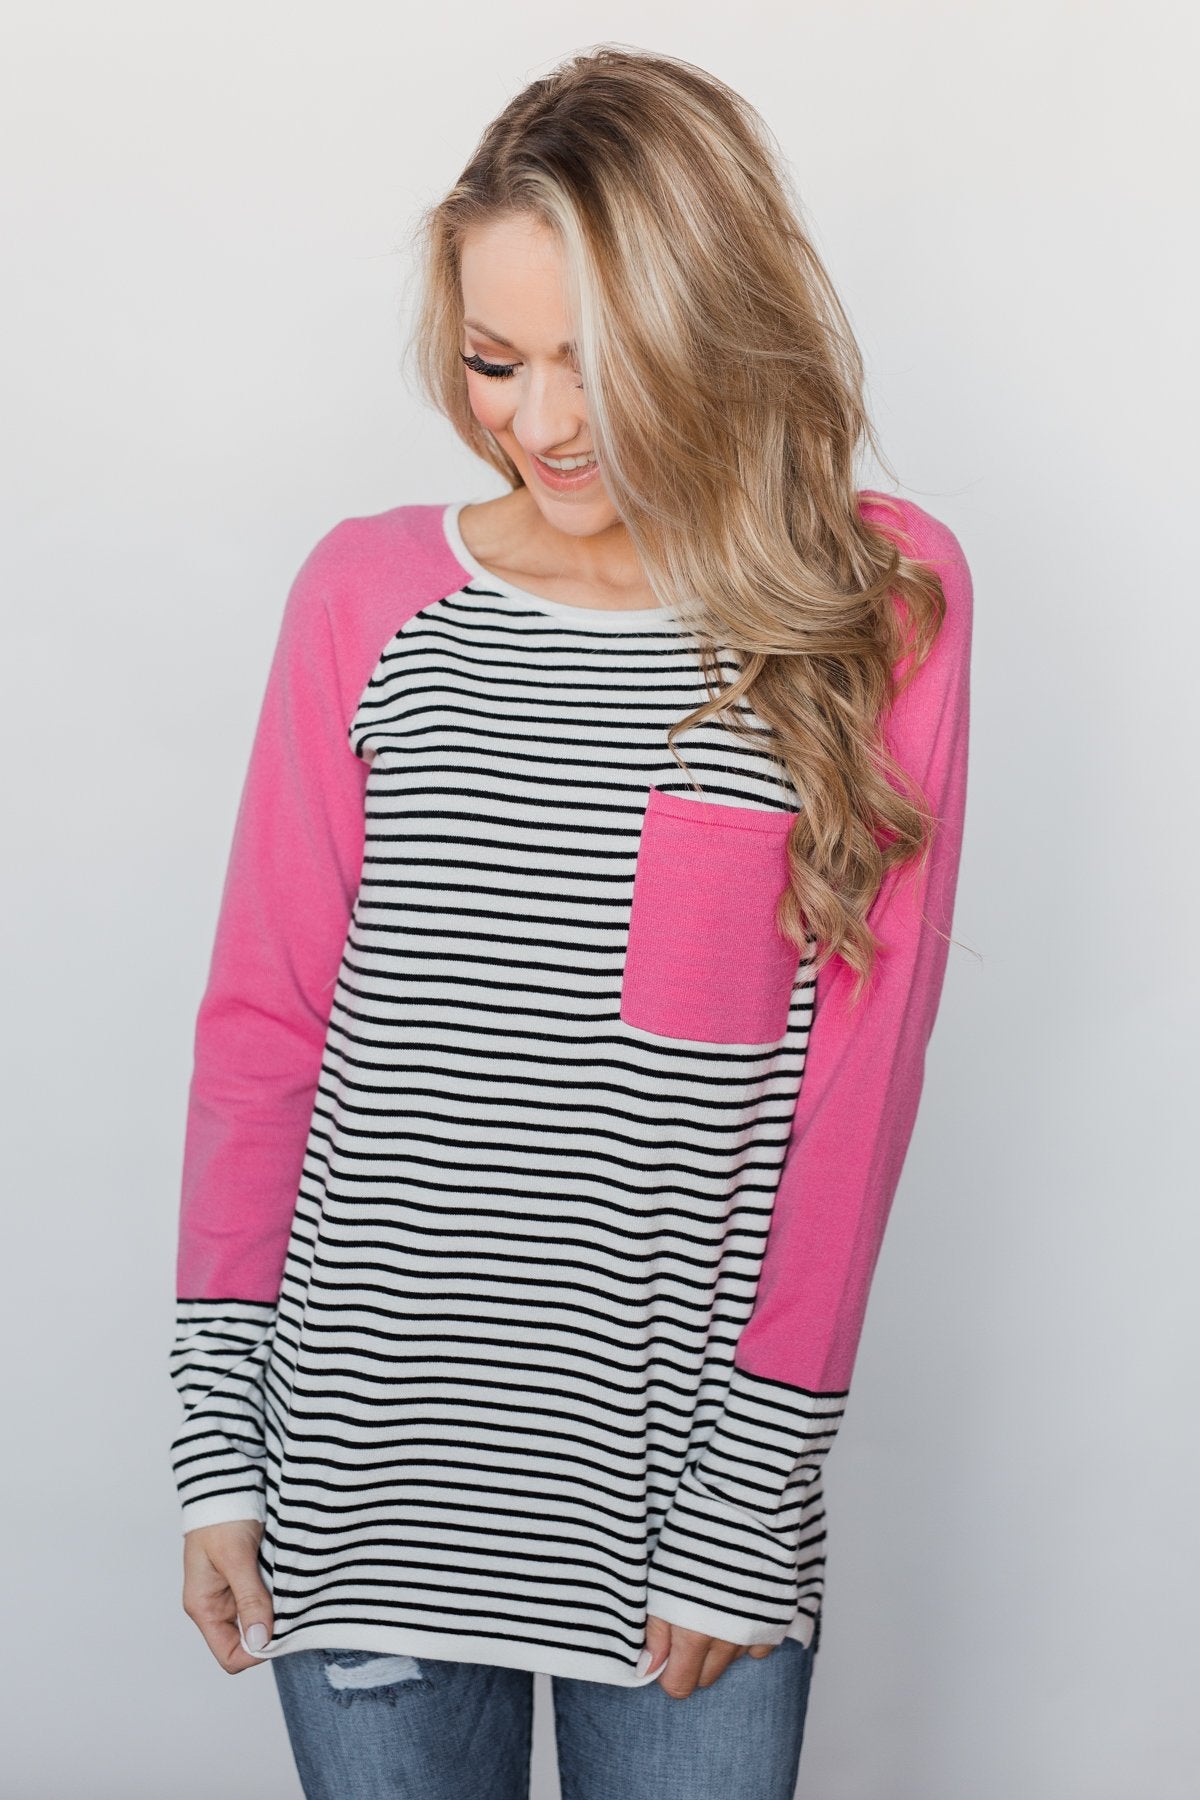 Pretty in Pink Striped Sweater - Bright Pink